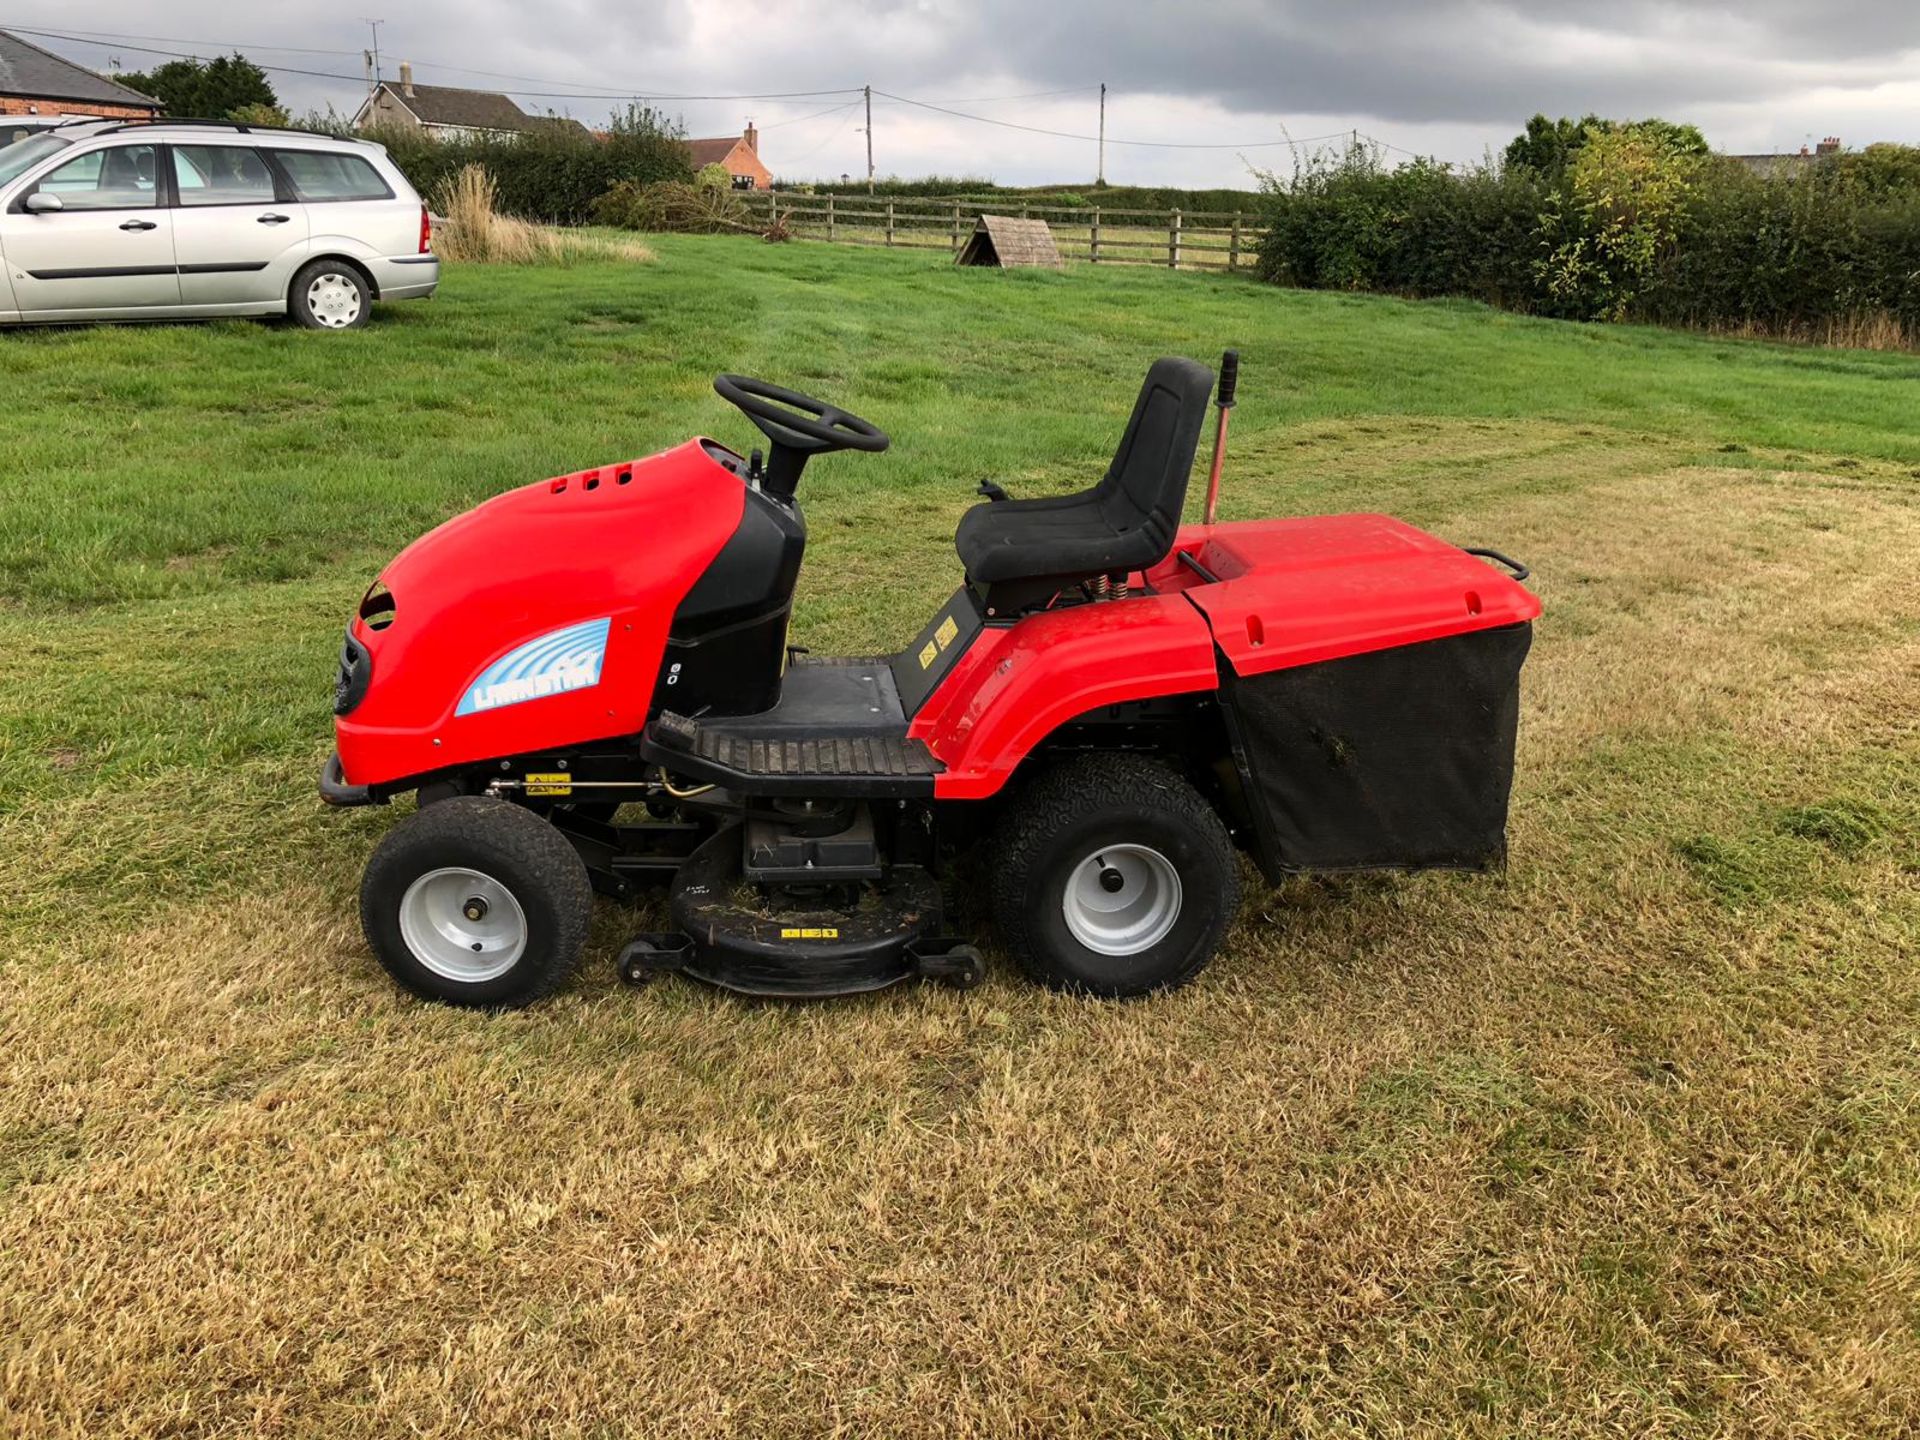 LAWNSTAR RIDE ON PETROL LAWN MOWER WITH REAR GRASS COLLECTOR, STARTS, RUNS AND CUTS *NO VAT* - Image 2 of 6